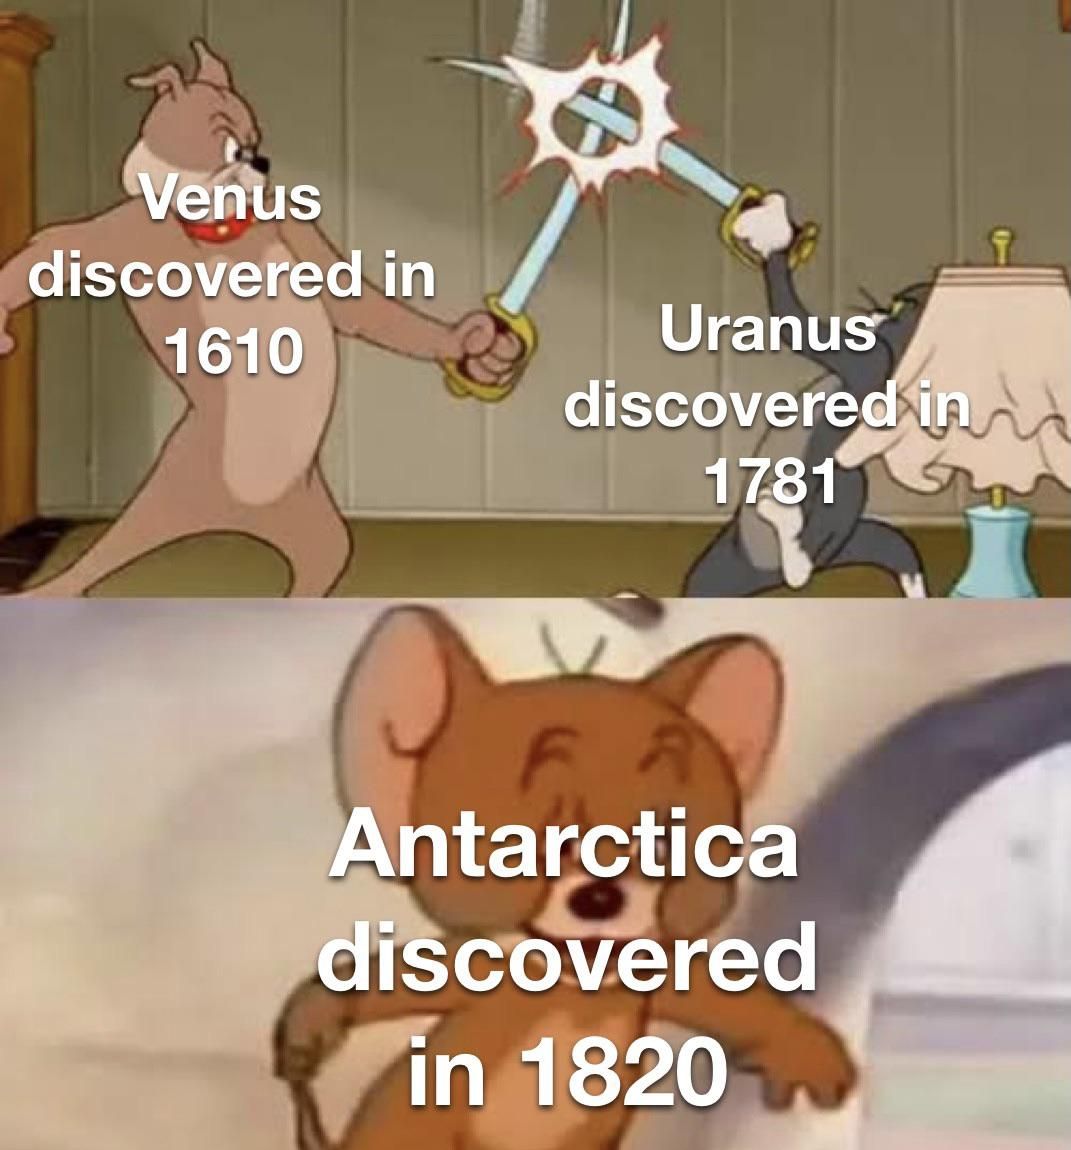 Well Antarctica was the last place on Earth to be discovered anyways...